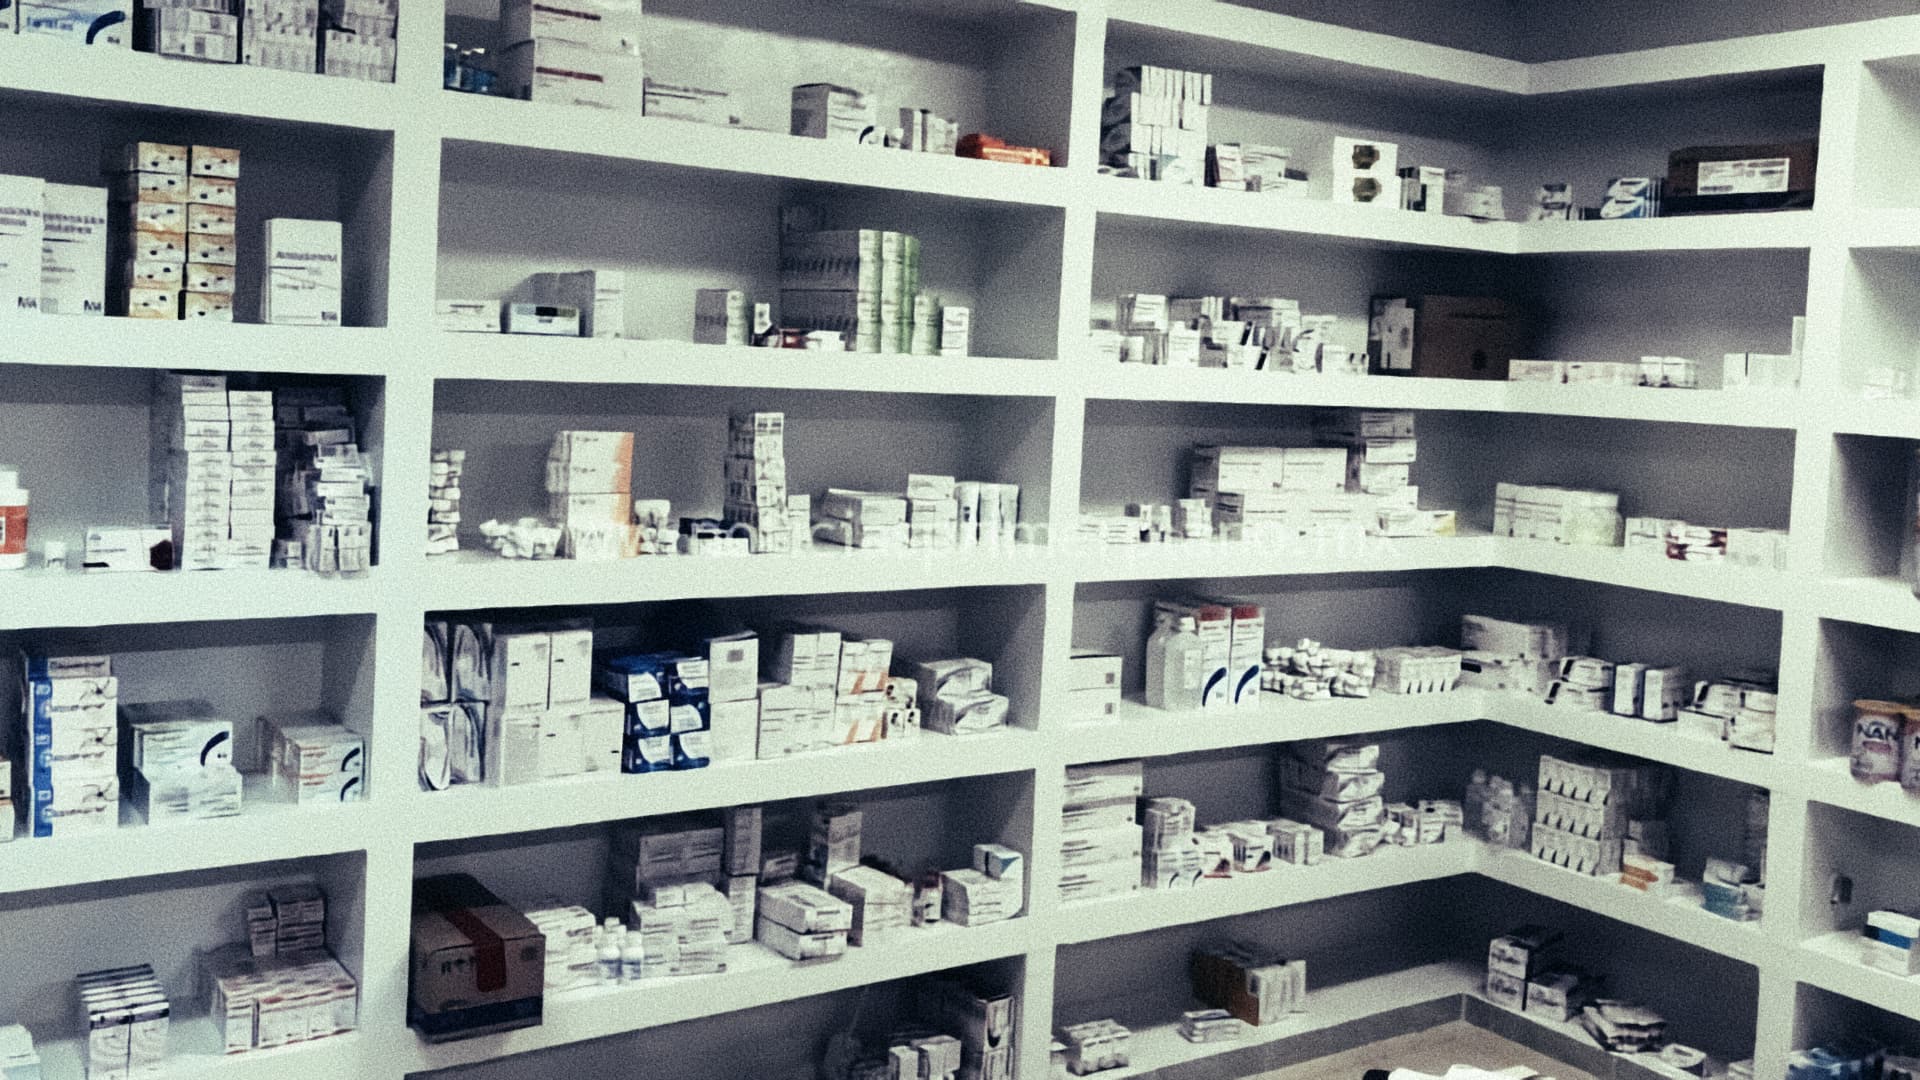 Lack of coordination in medicine purchases persists: CANIFARMA